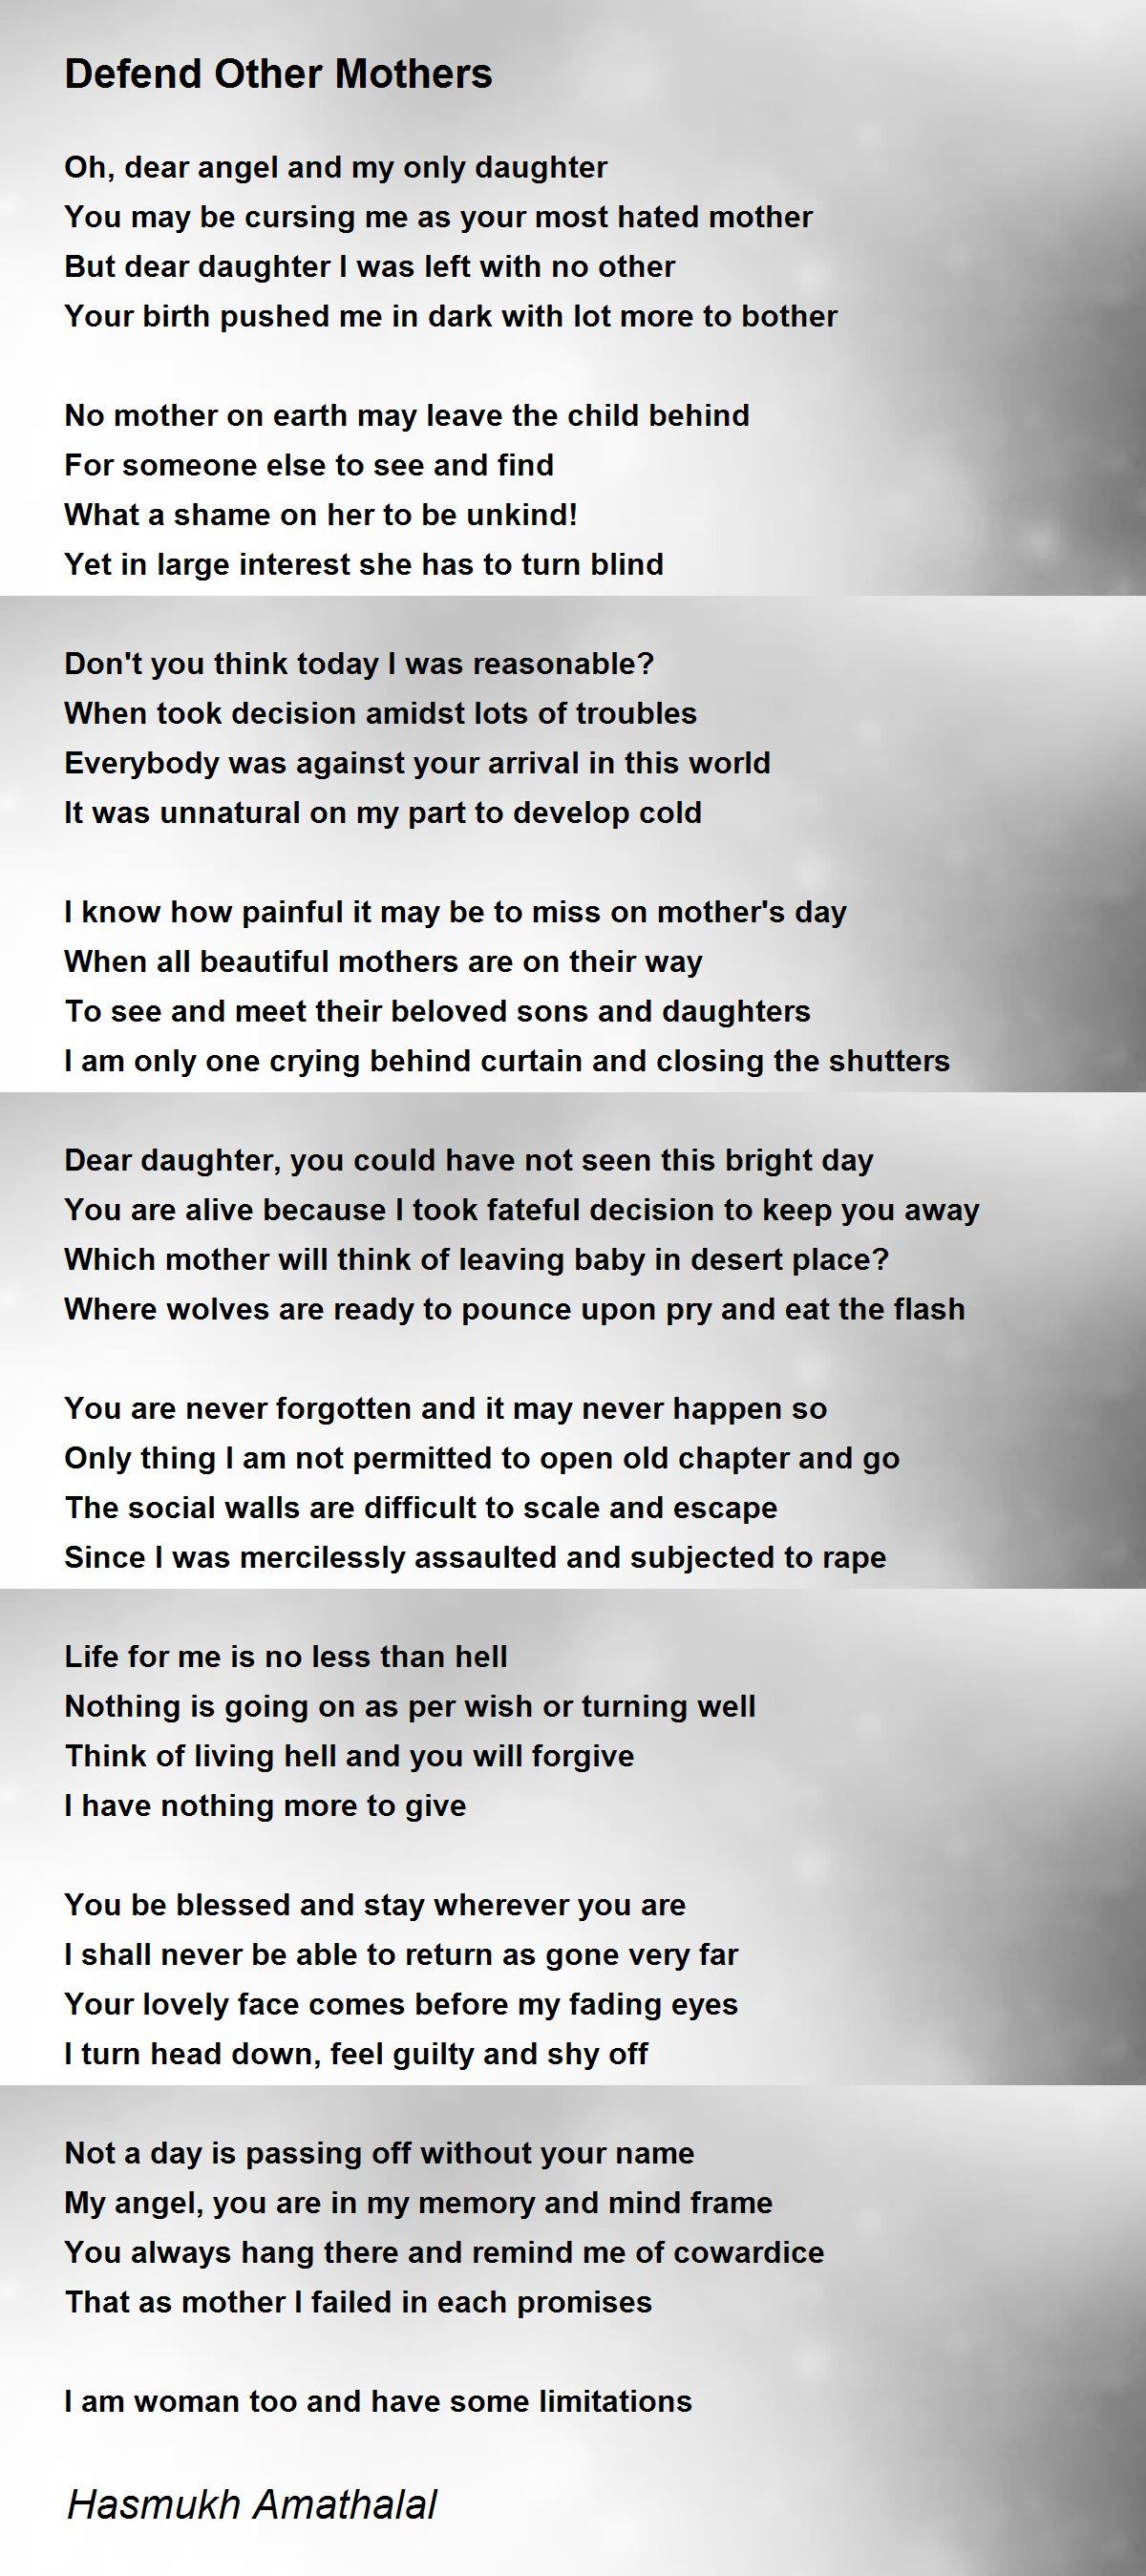 Defend Other Mothers By Mehta Hasmukh Amathalal Defend Other Mothers Poem